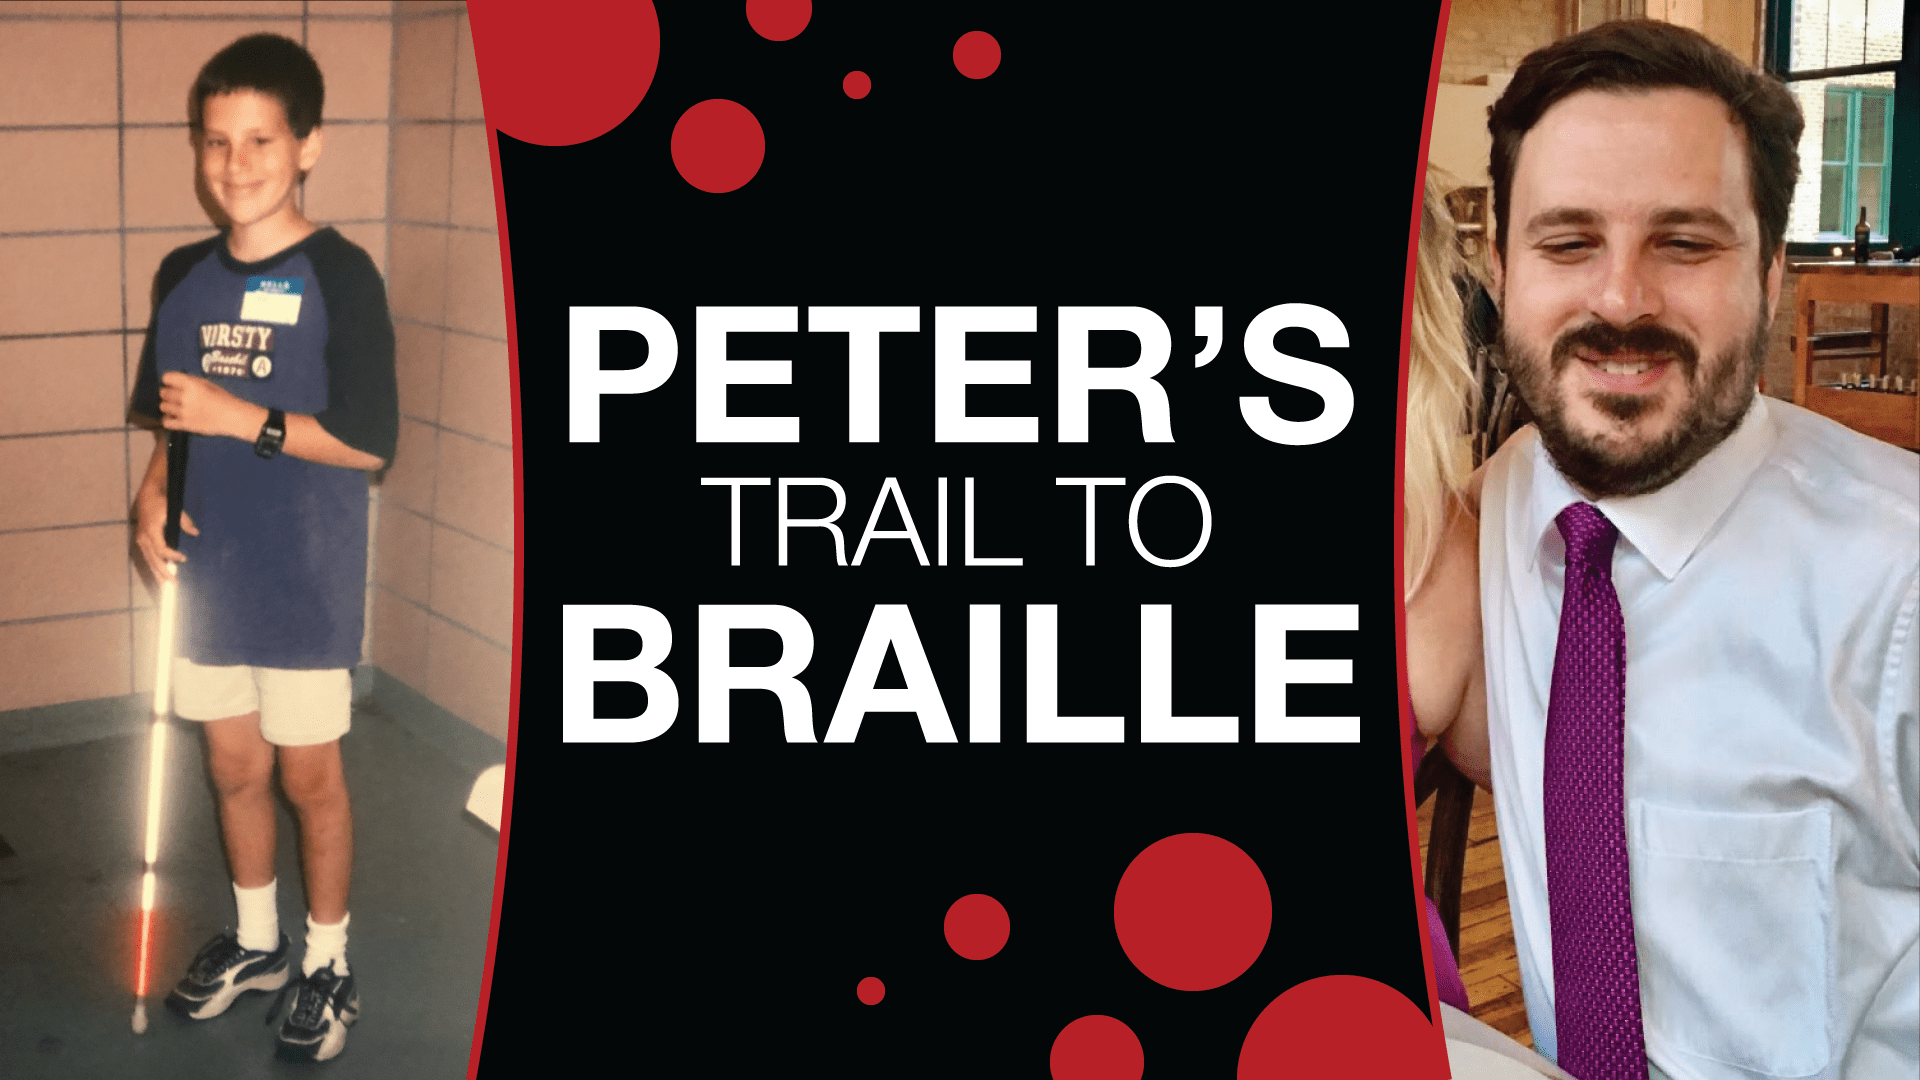 a photo of Peter as a child on the left, a photo of peter now as an adult on the right. In the middle is text that reads "Peter's Trail to Braille" with red braille like dots surrounding it